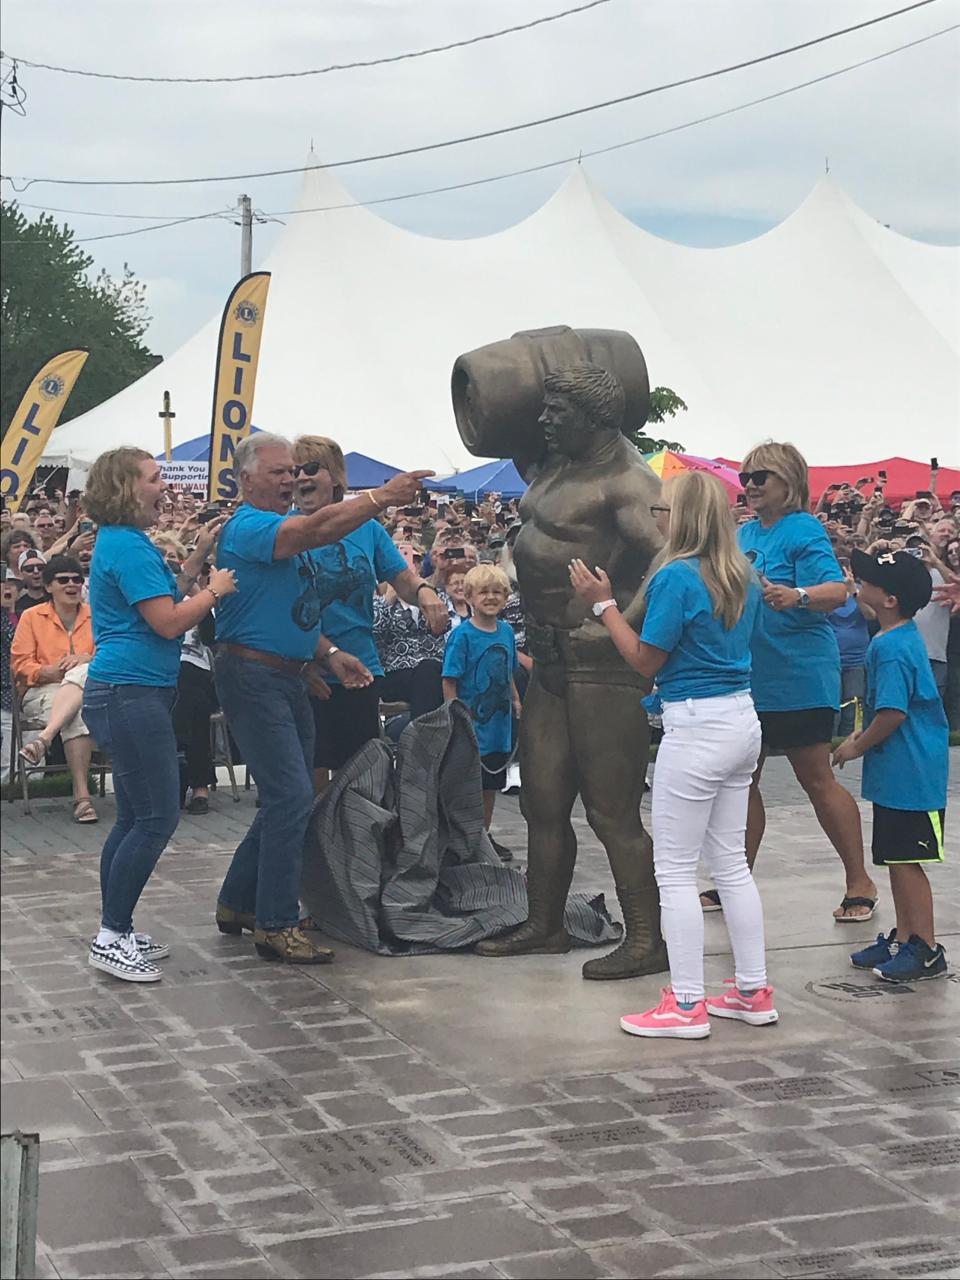 The Lisowski family unveils the life-size statue of Reggie "Da Crusher" Lisowski at Crusherfest in South Milwaukee on June 8, 2019.